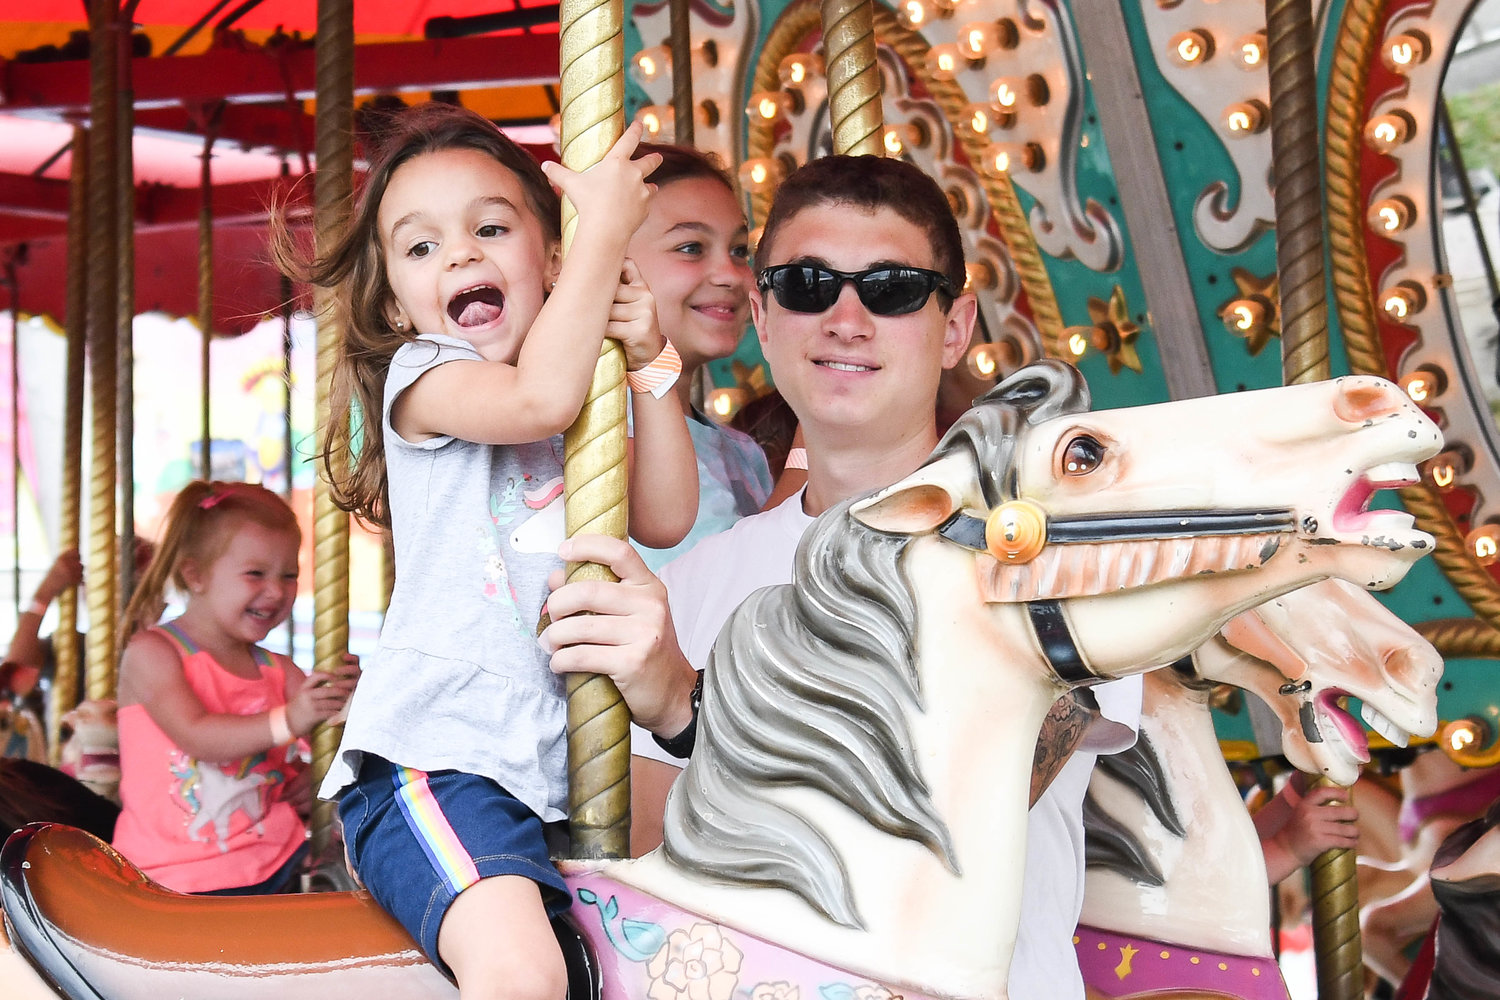 From left, Ellie Durr and her sister Evelyn Durr ride the carousel with their dad Joe Durr on Thursday at the Herkimer County Fair.